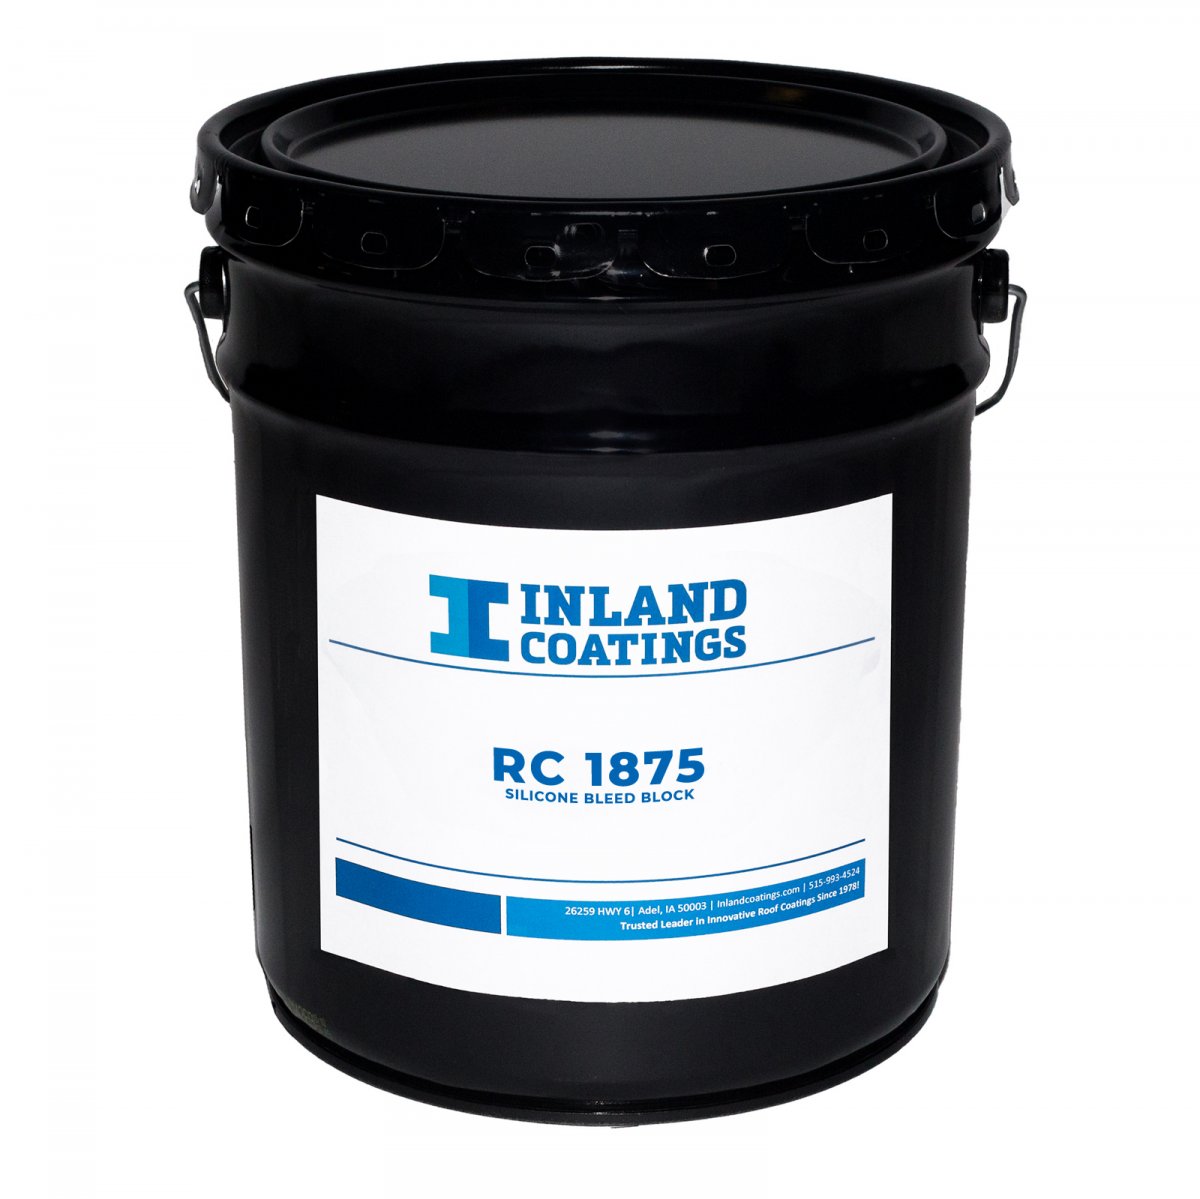 A bucket of Inland's RC-1875 Silicone Bleed Block.